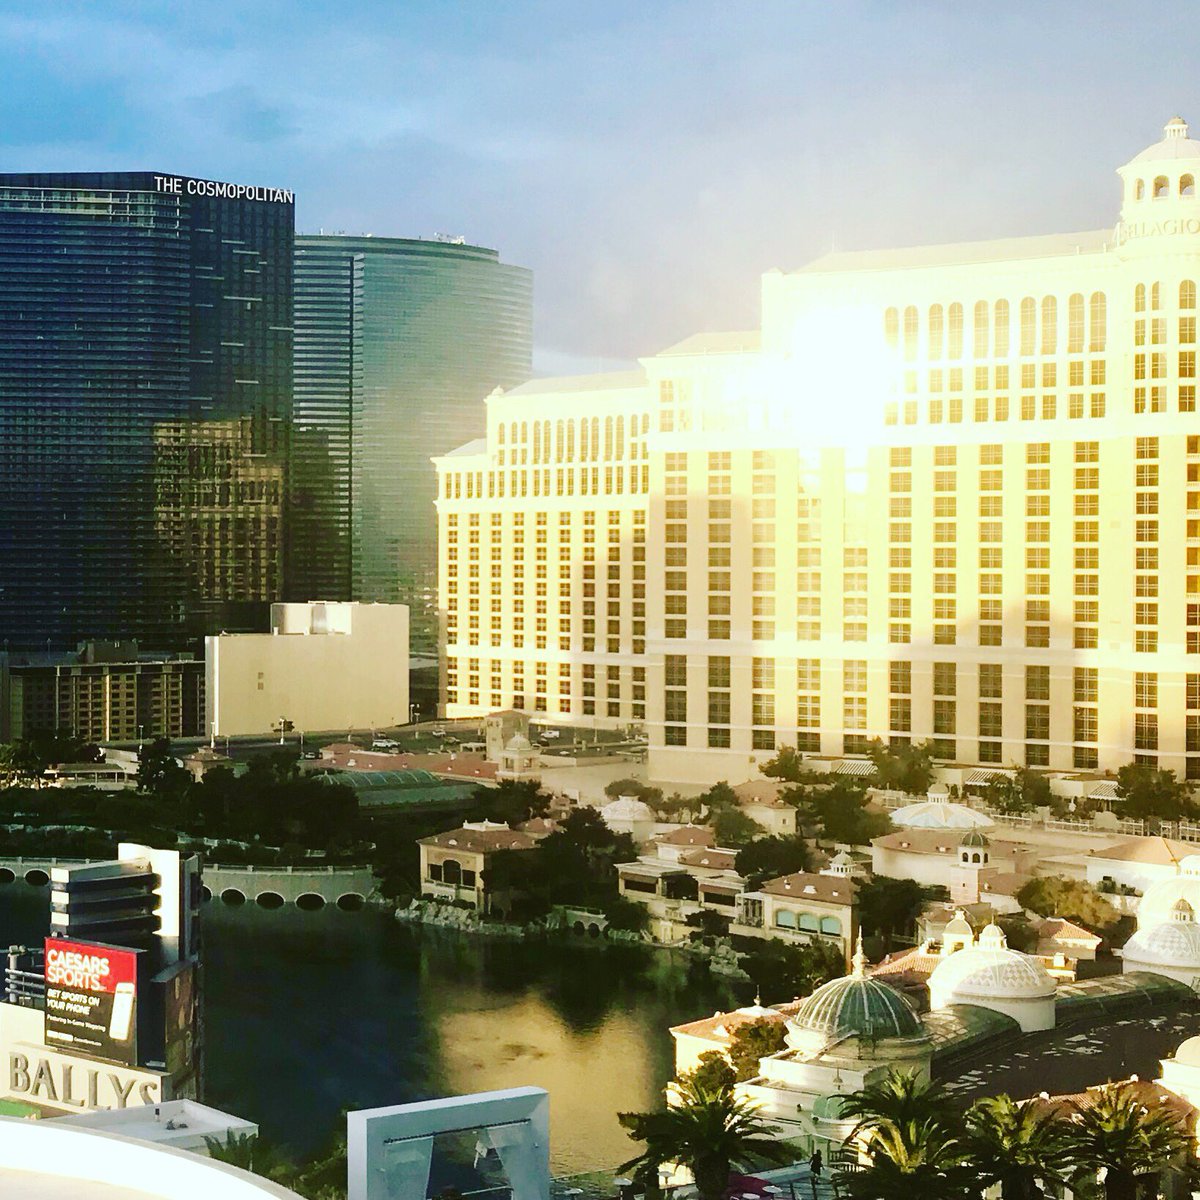 Live... from #thestrip.  We’re here all week folks #saving & #changing lives.  Drop on by 🙏 🙏 🙏 #sunrise #lasvegas

#ArmorUp #ArmorUpAmerica #ArmorUpArmedForces #SafeCallNow #CatchingHell #FirstIn #BayleeAlmon #ArmorUpWV #ArmorUpHawaii #ArmorUpTX #ArmorUpCA #ArmorUpOK